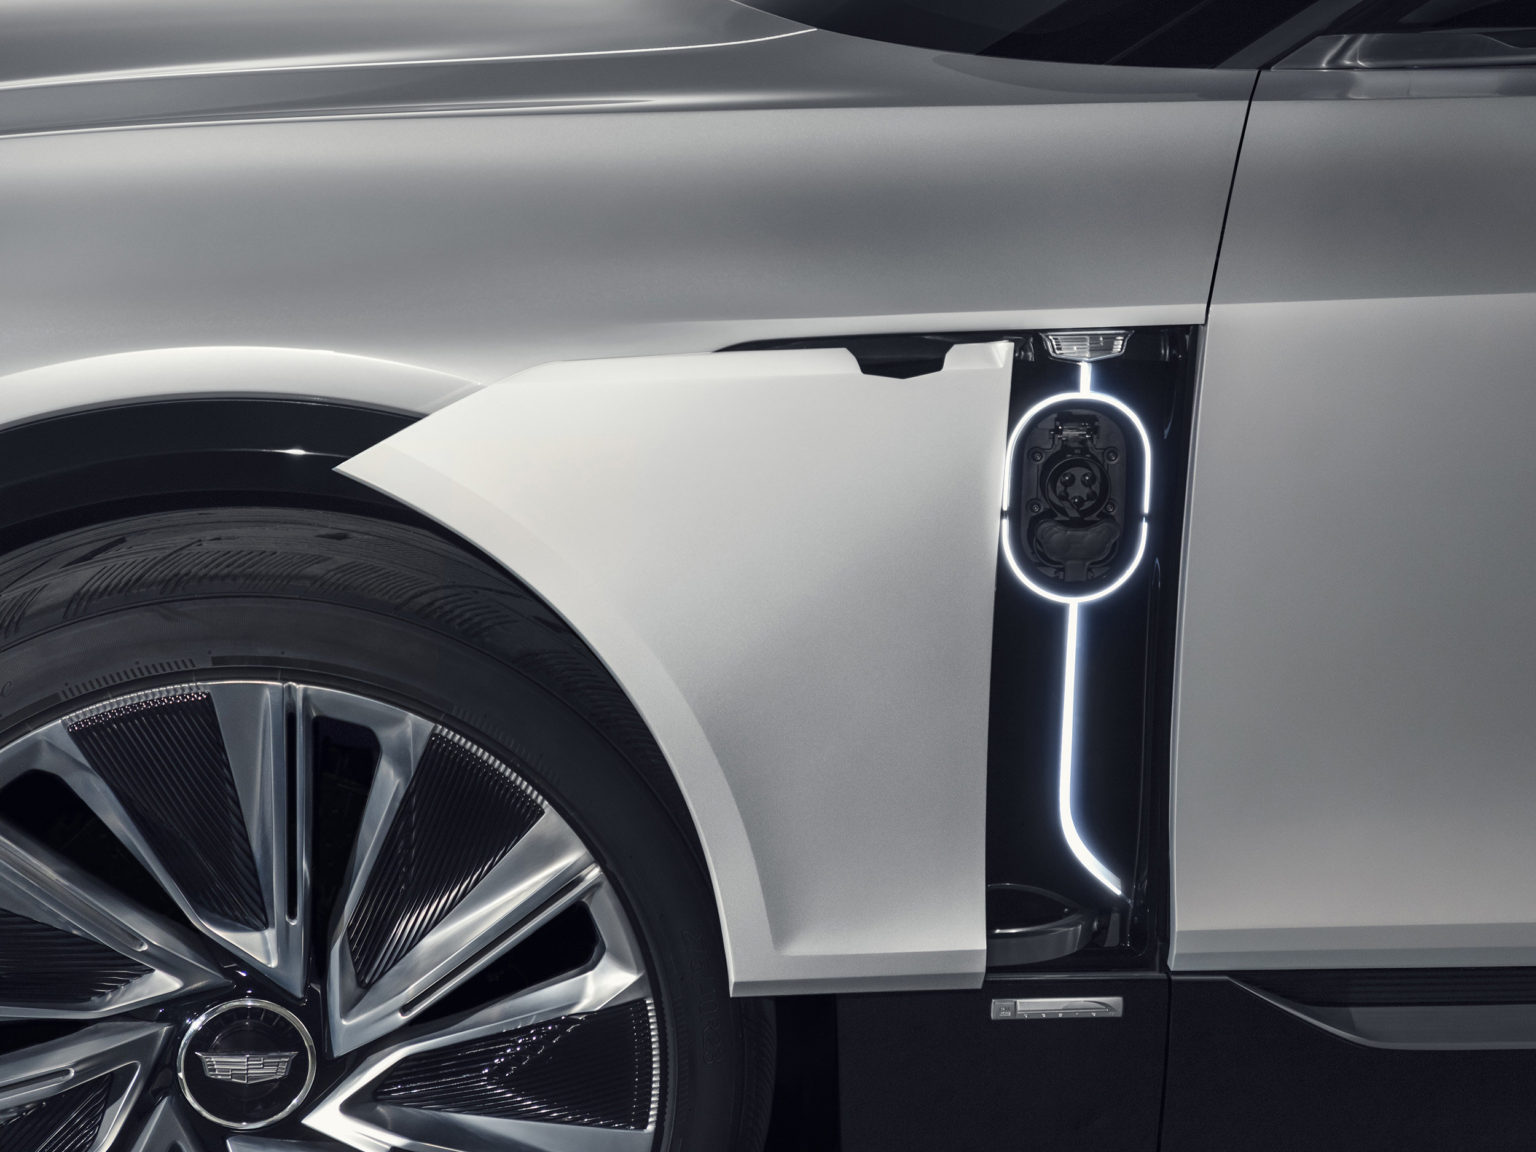 The Cadillac Lyris is an all-electric SUV. Based on this new photo, we now know where the model's plug is.